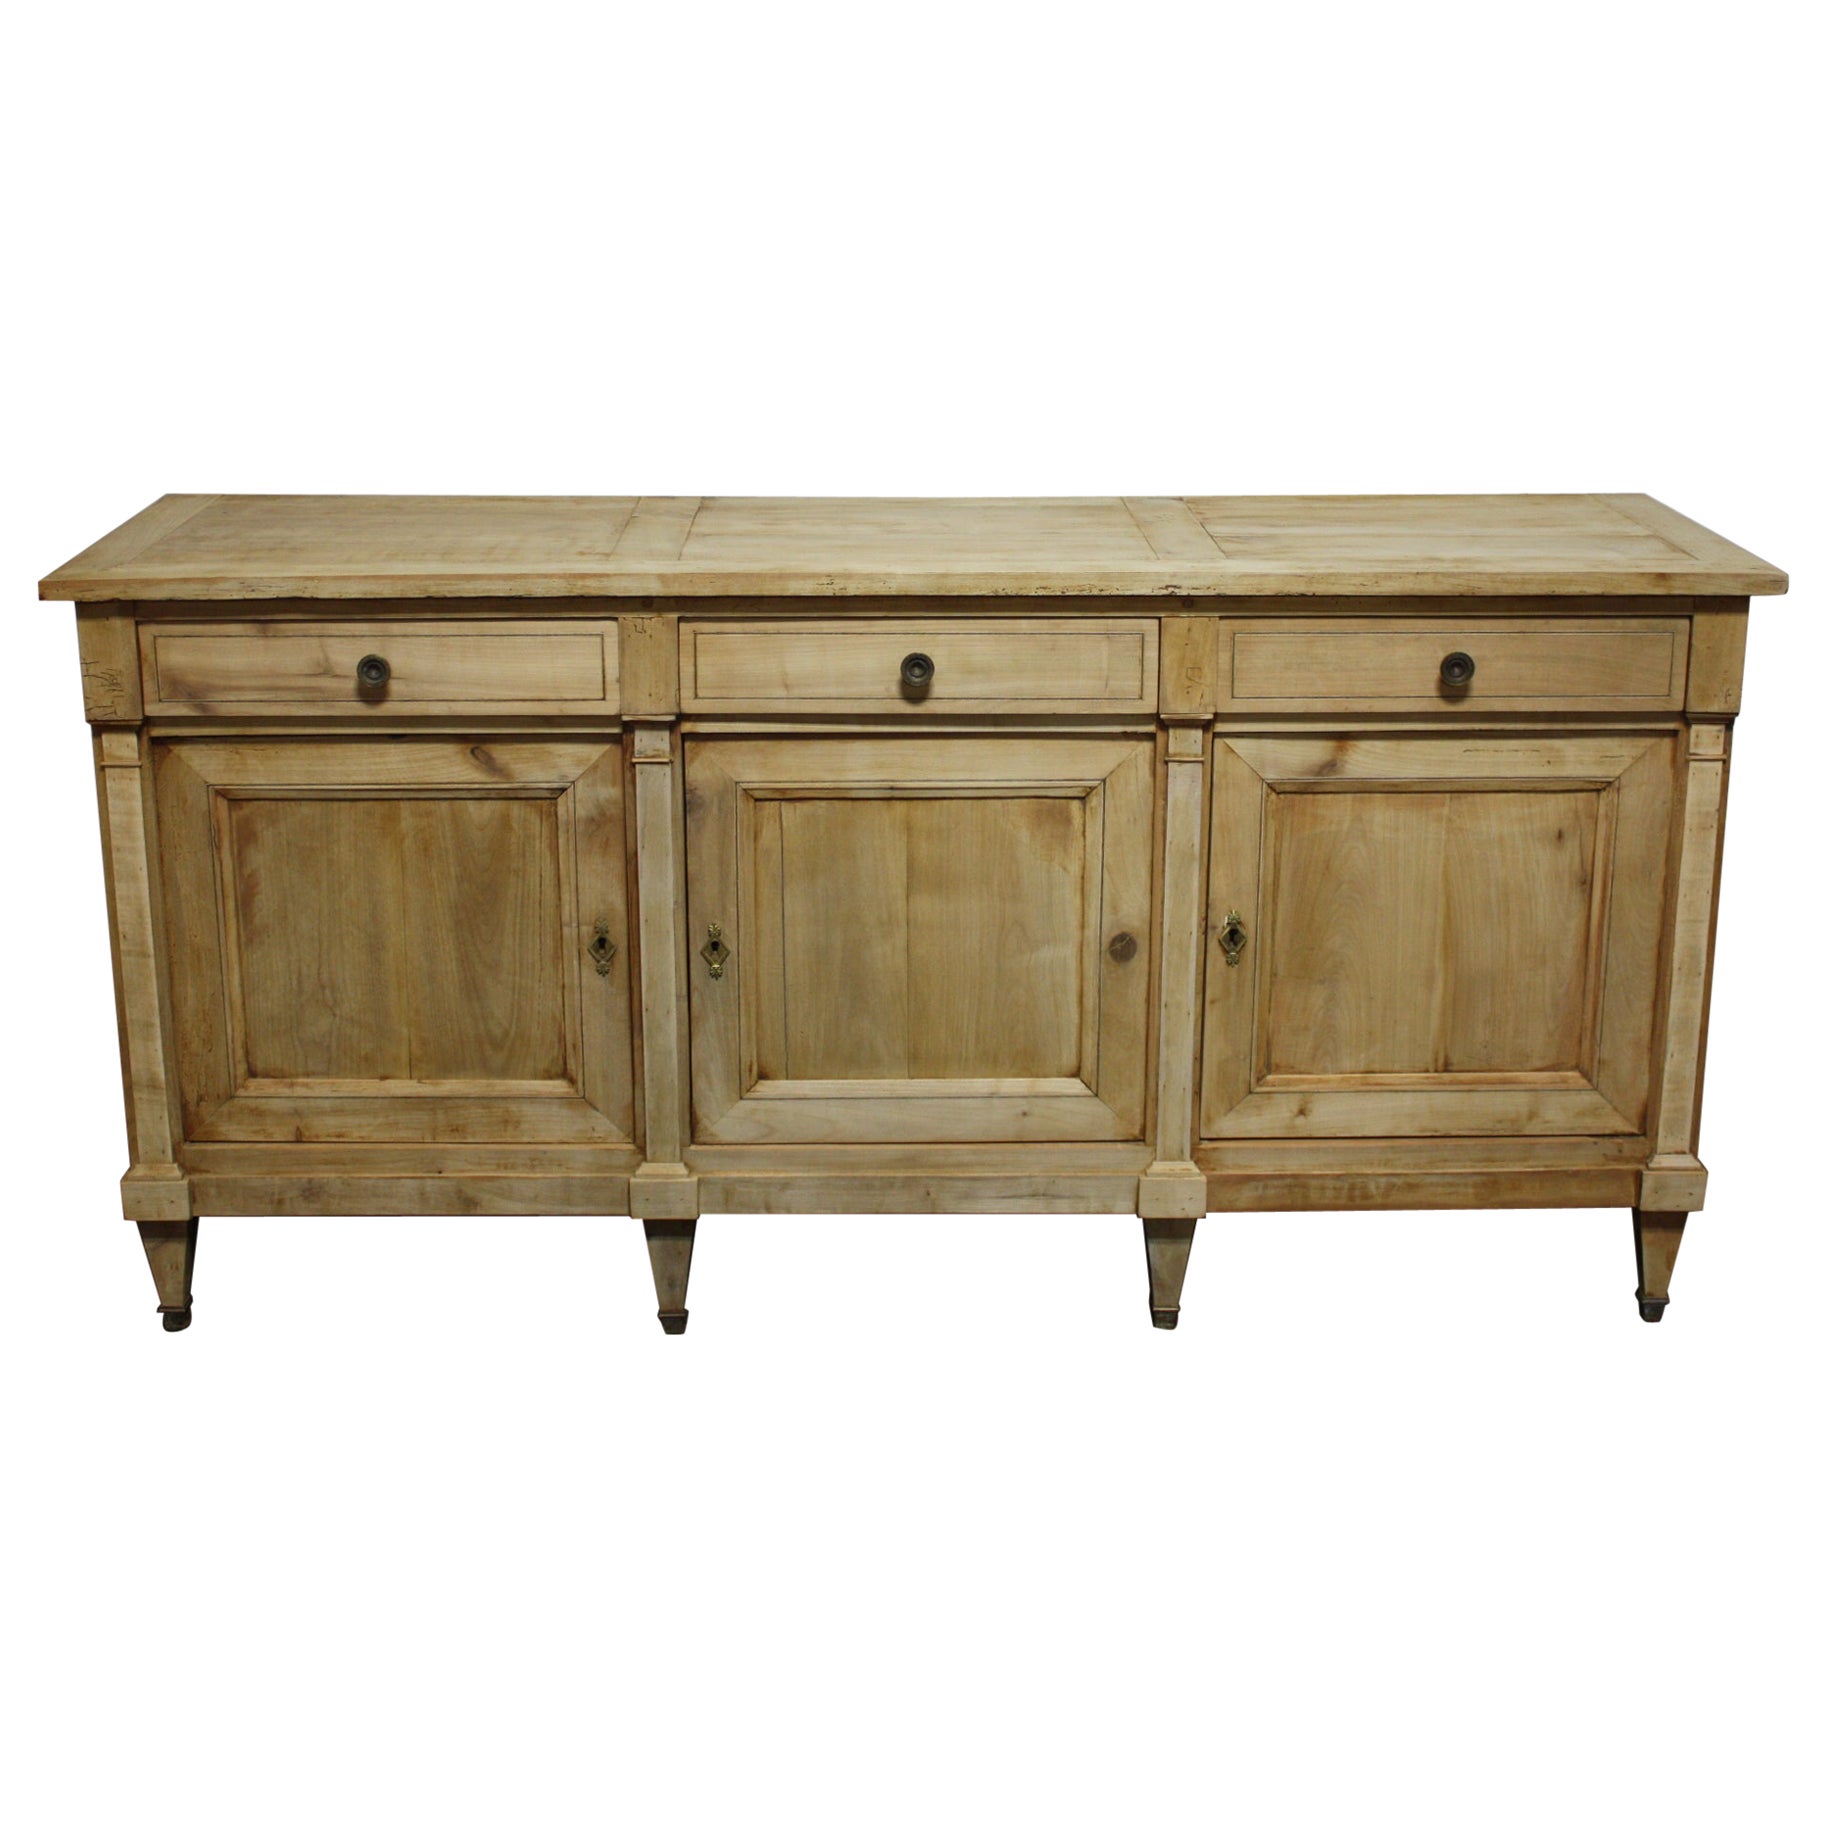 French 19th Century Directoire Sideboard